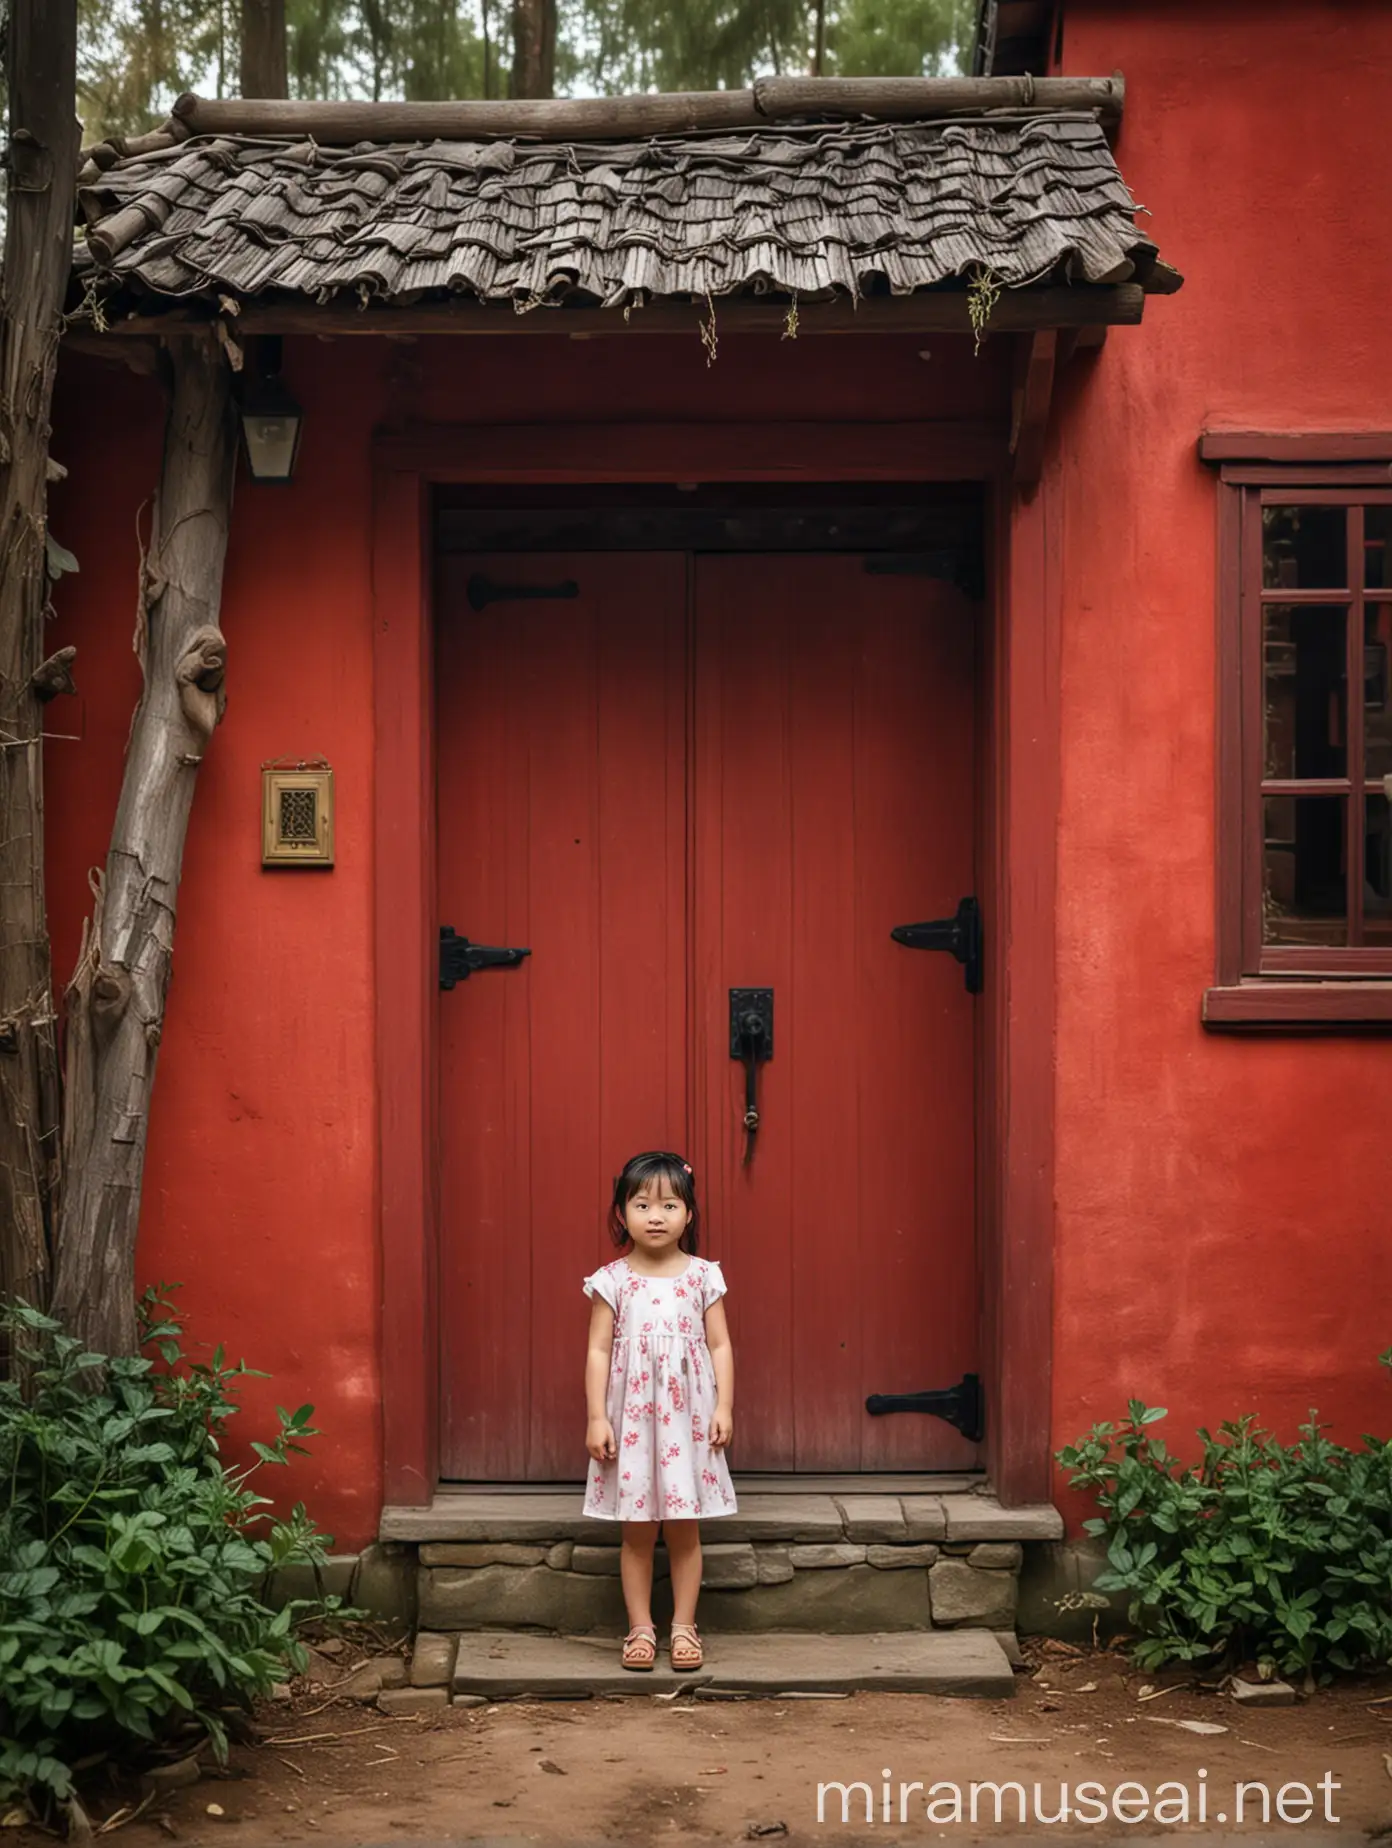 Little Chinese girl in front of the door of a red cottage in a forest